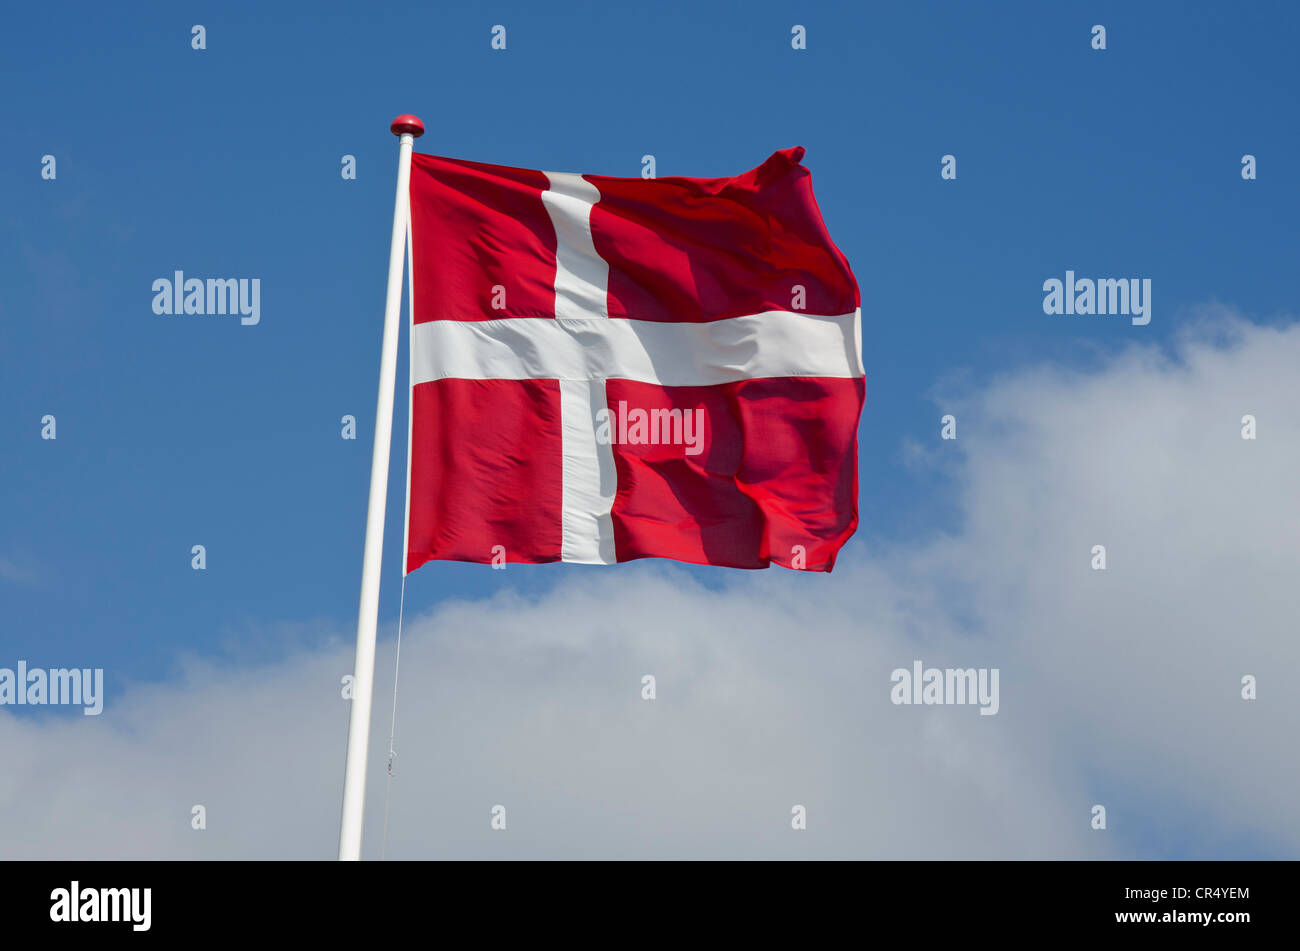 Danish national flag against a blue sky with clouds, Saeby, North Jutland region, Denmark, Europe Stock Photo